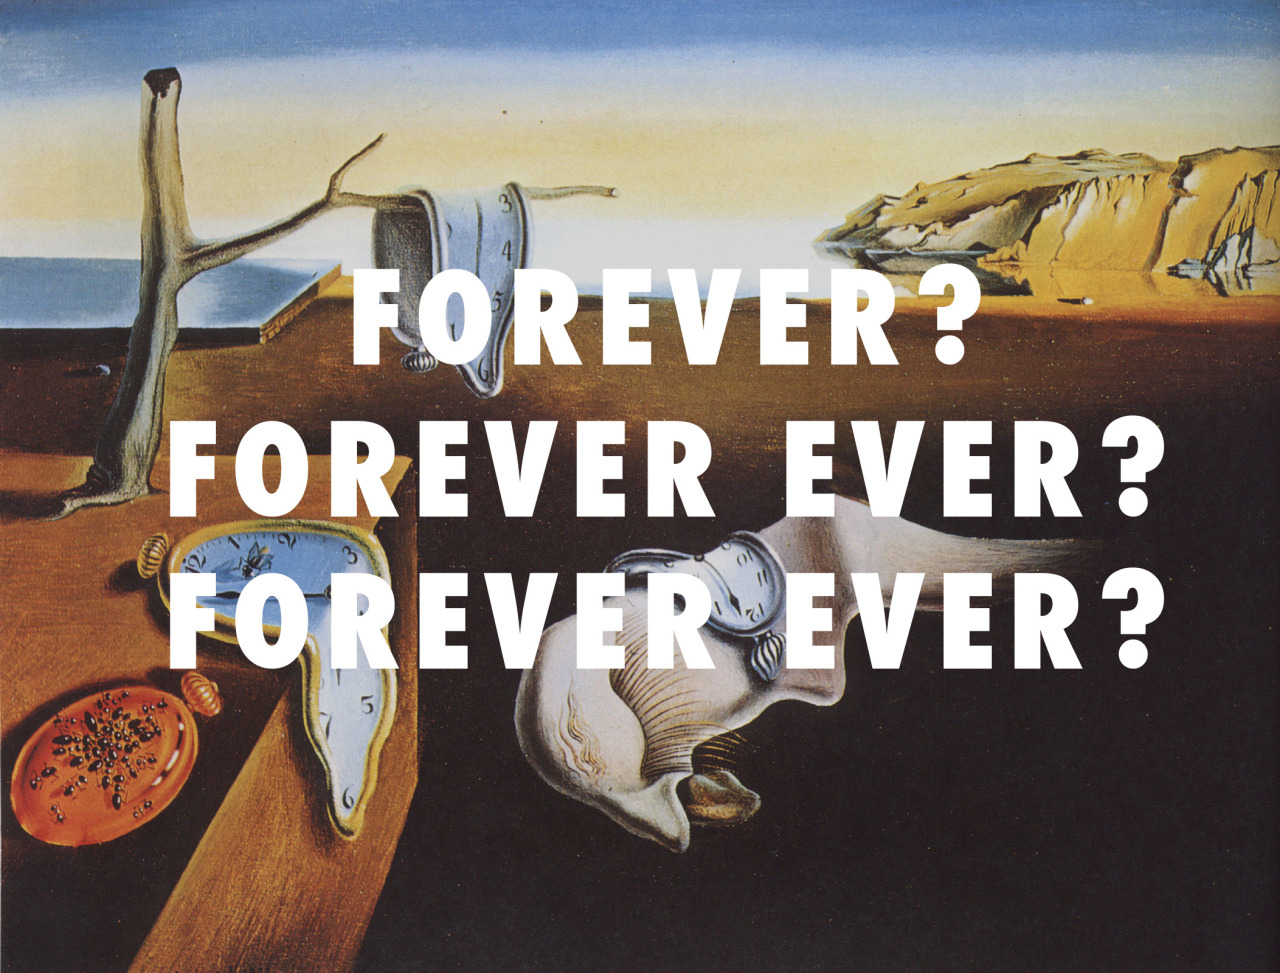 flyartproductions:
“ The persistence of Ms. Jackson
The Persistence of Memory (1931), Salvador Dali / Ms. Jackson, Outkast
”